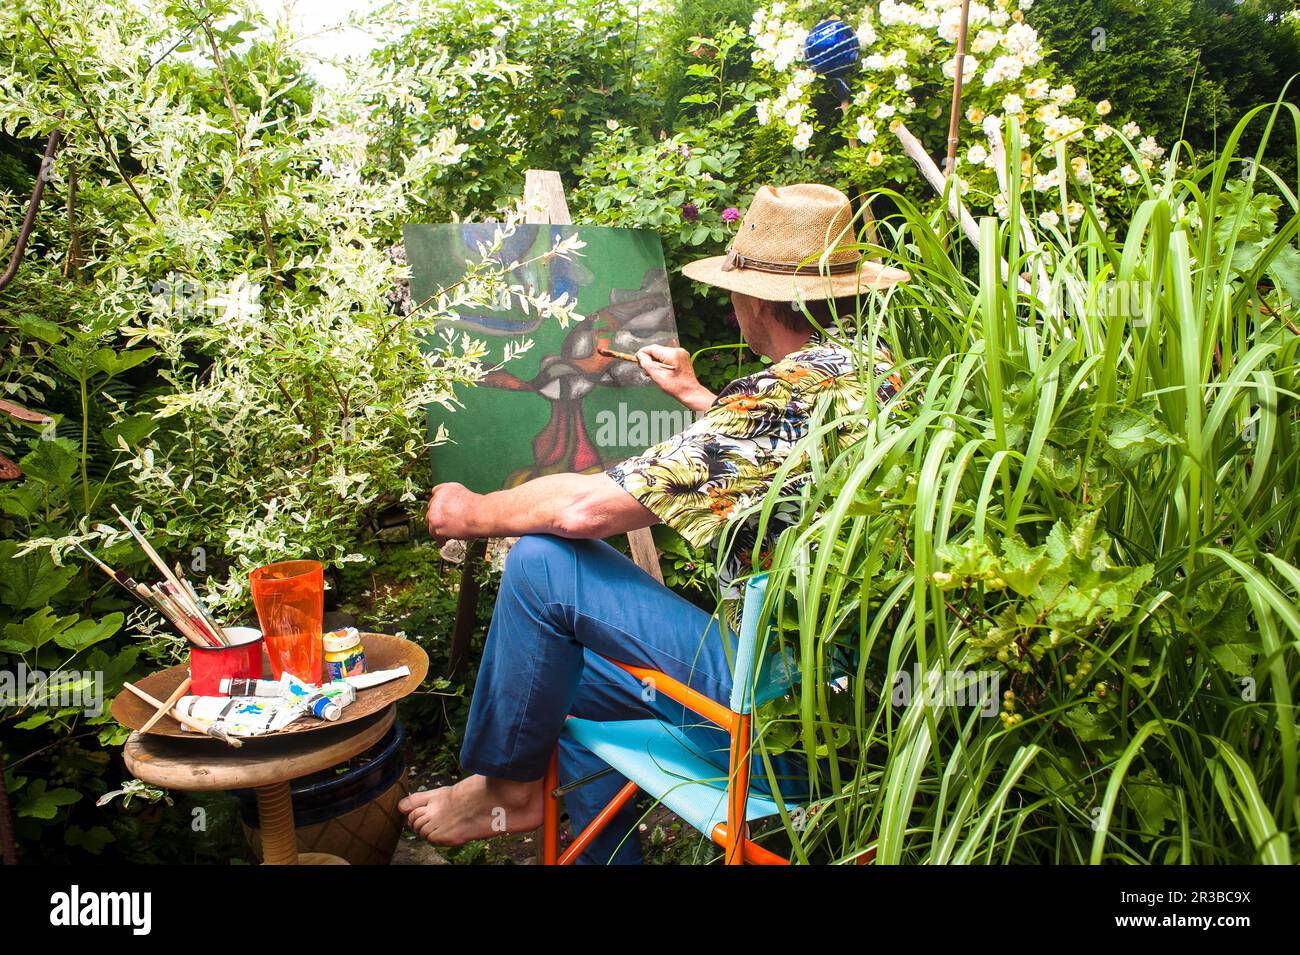 Man painting amidst plants sitting on chair in garden Stock Photo